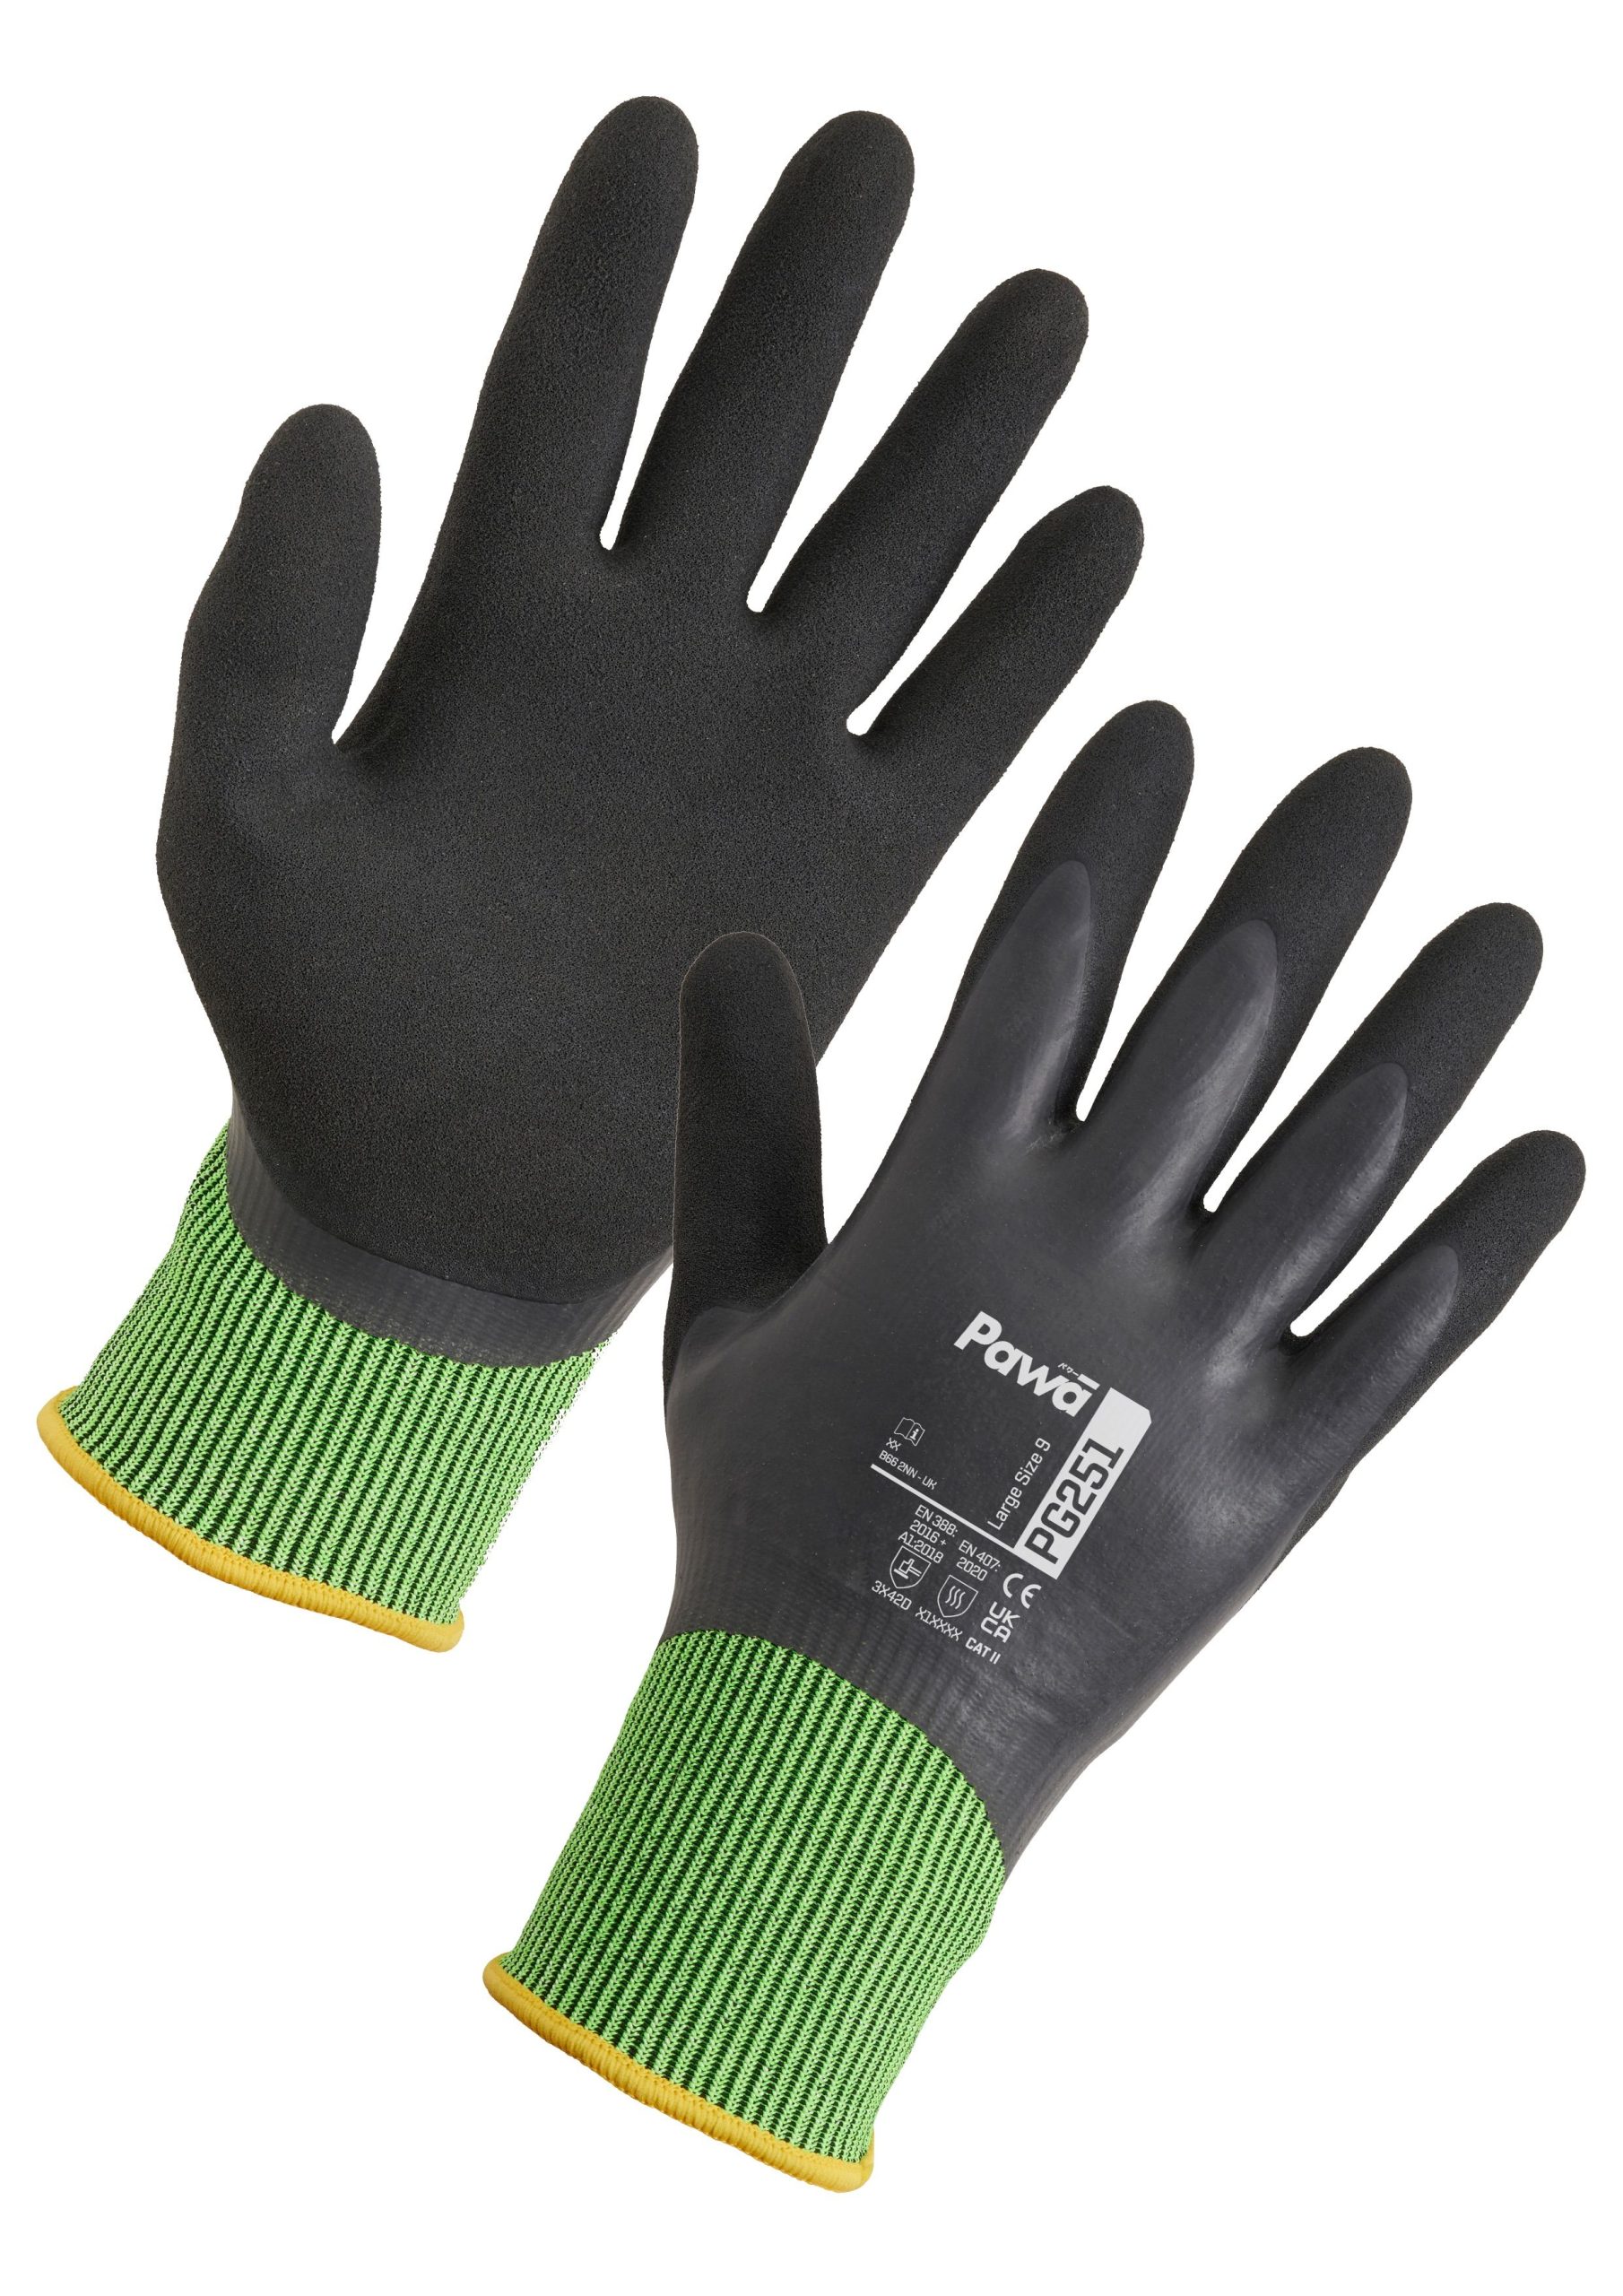 Supertouch launches new Pawā range of multinorm gloves for wet working conditions